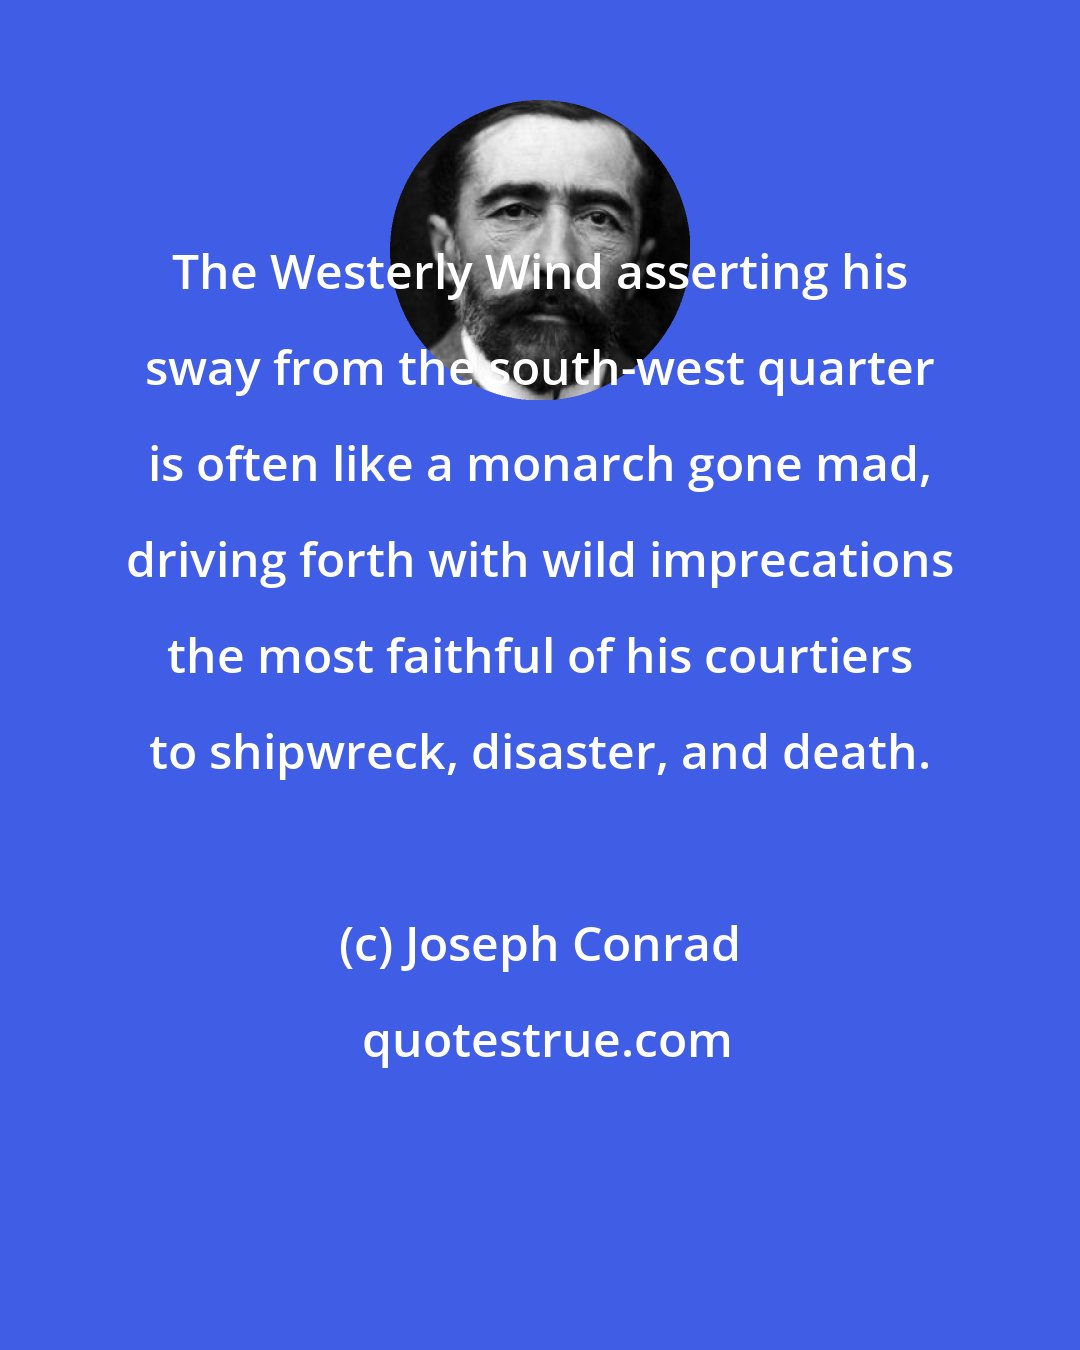 Joseph Conrad: The Westerly Wind asserting his sway from the south-west quarter is often like a monarch gone mad, driving forth with wild imprecations the most faithful of his courtiers to shipwreck, disaster, and death.